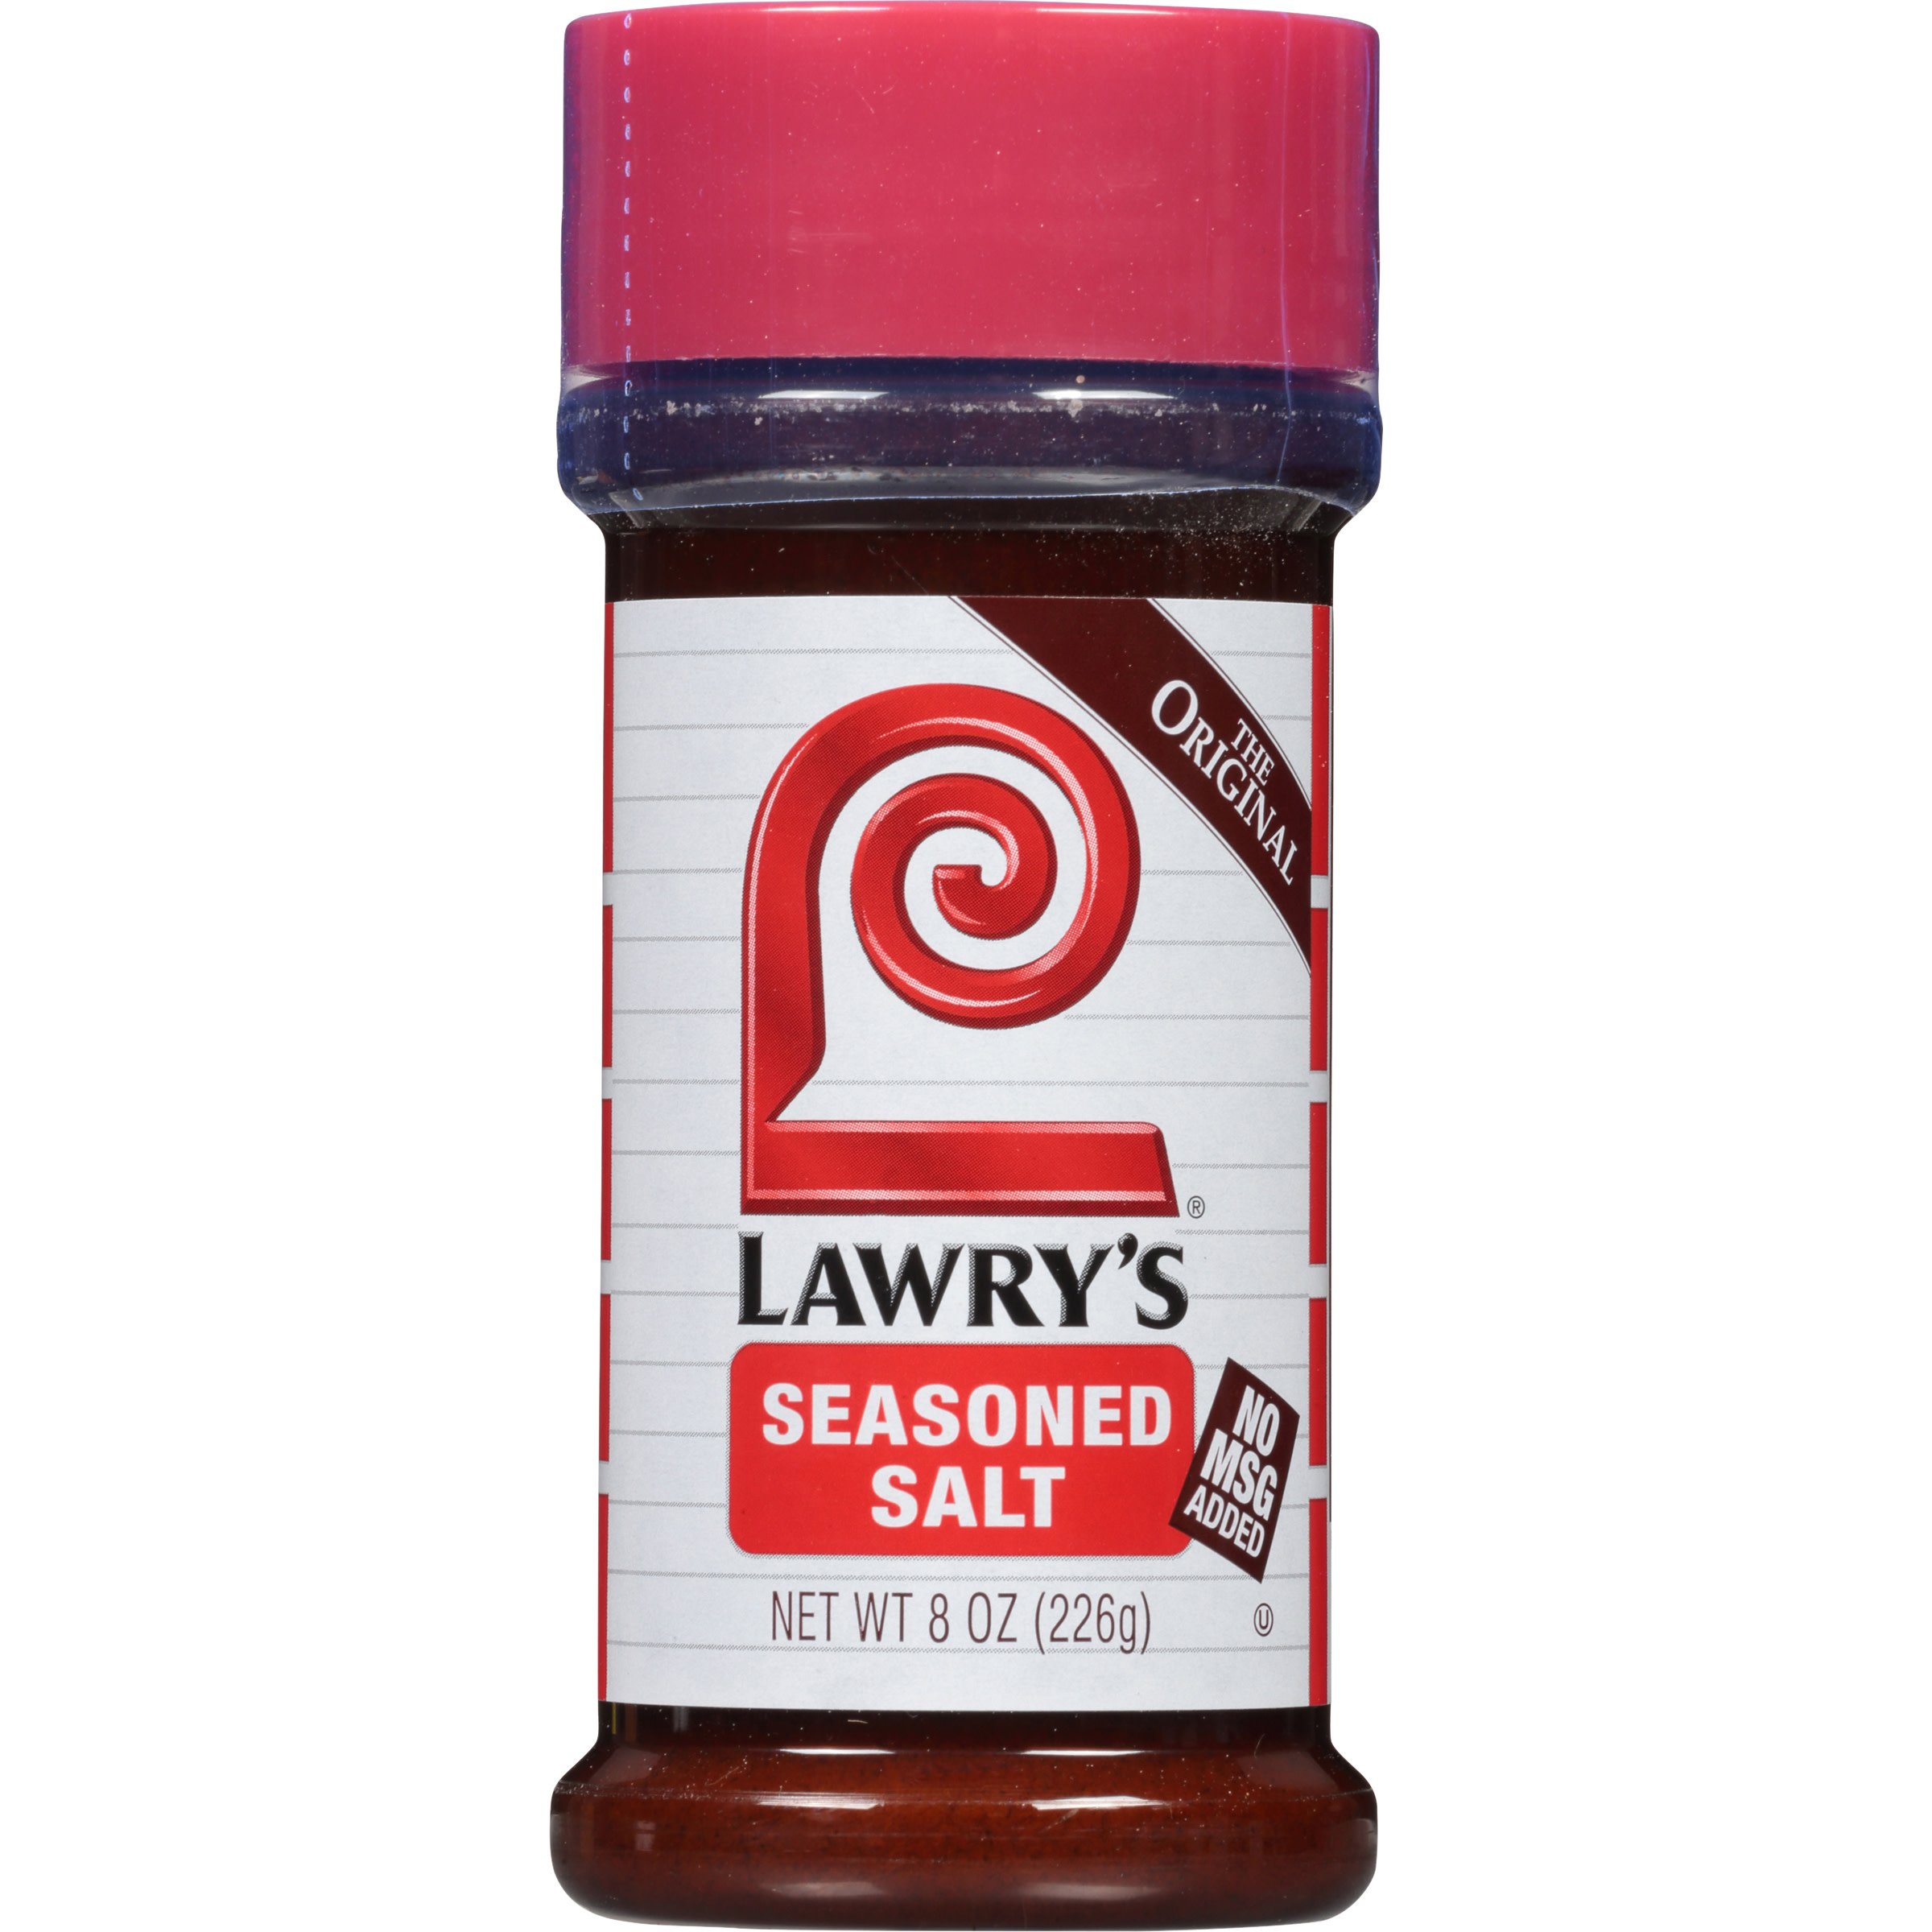 Lawrys The Original Seasoned Salt Shop Herbs And Spices At H E B